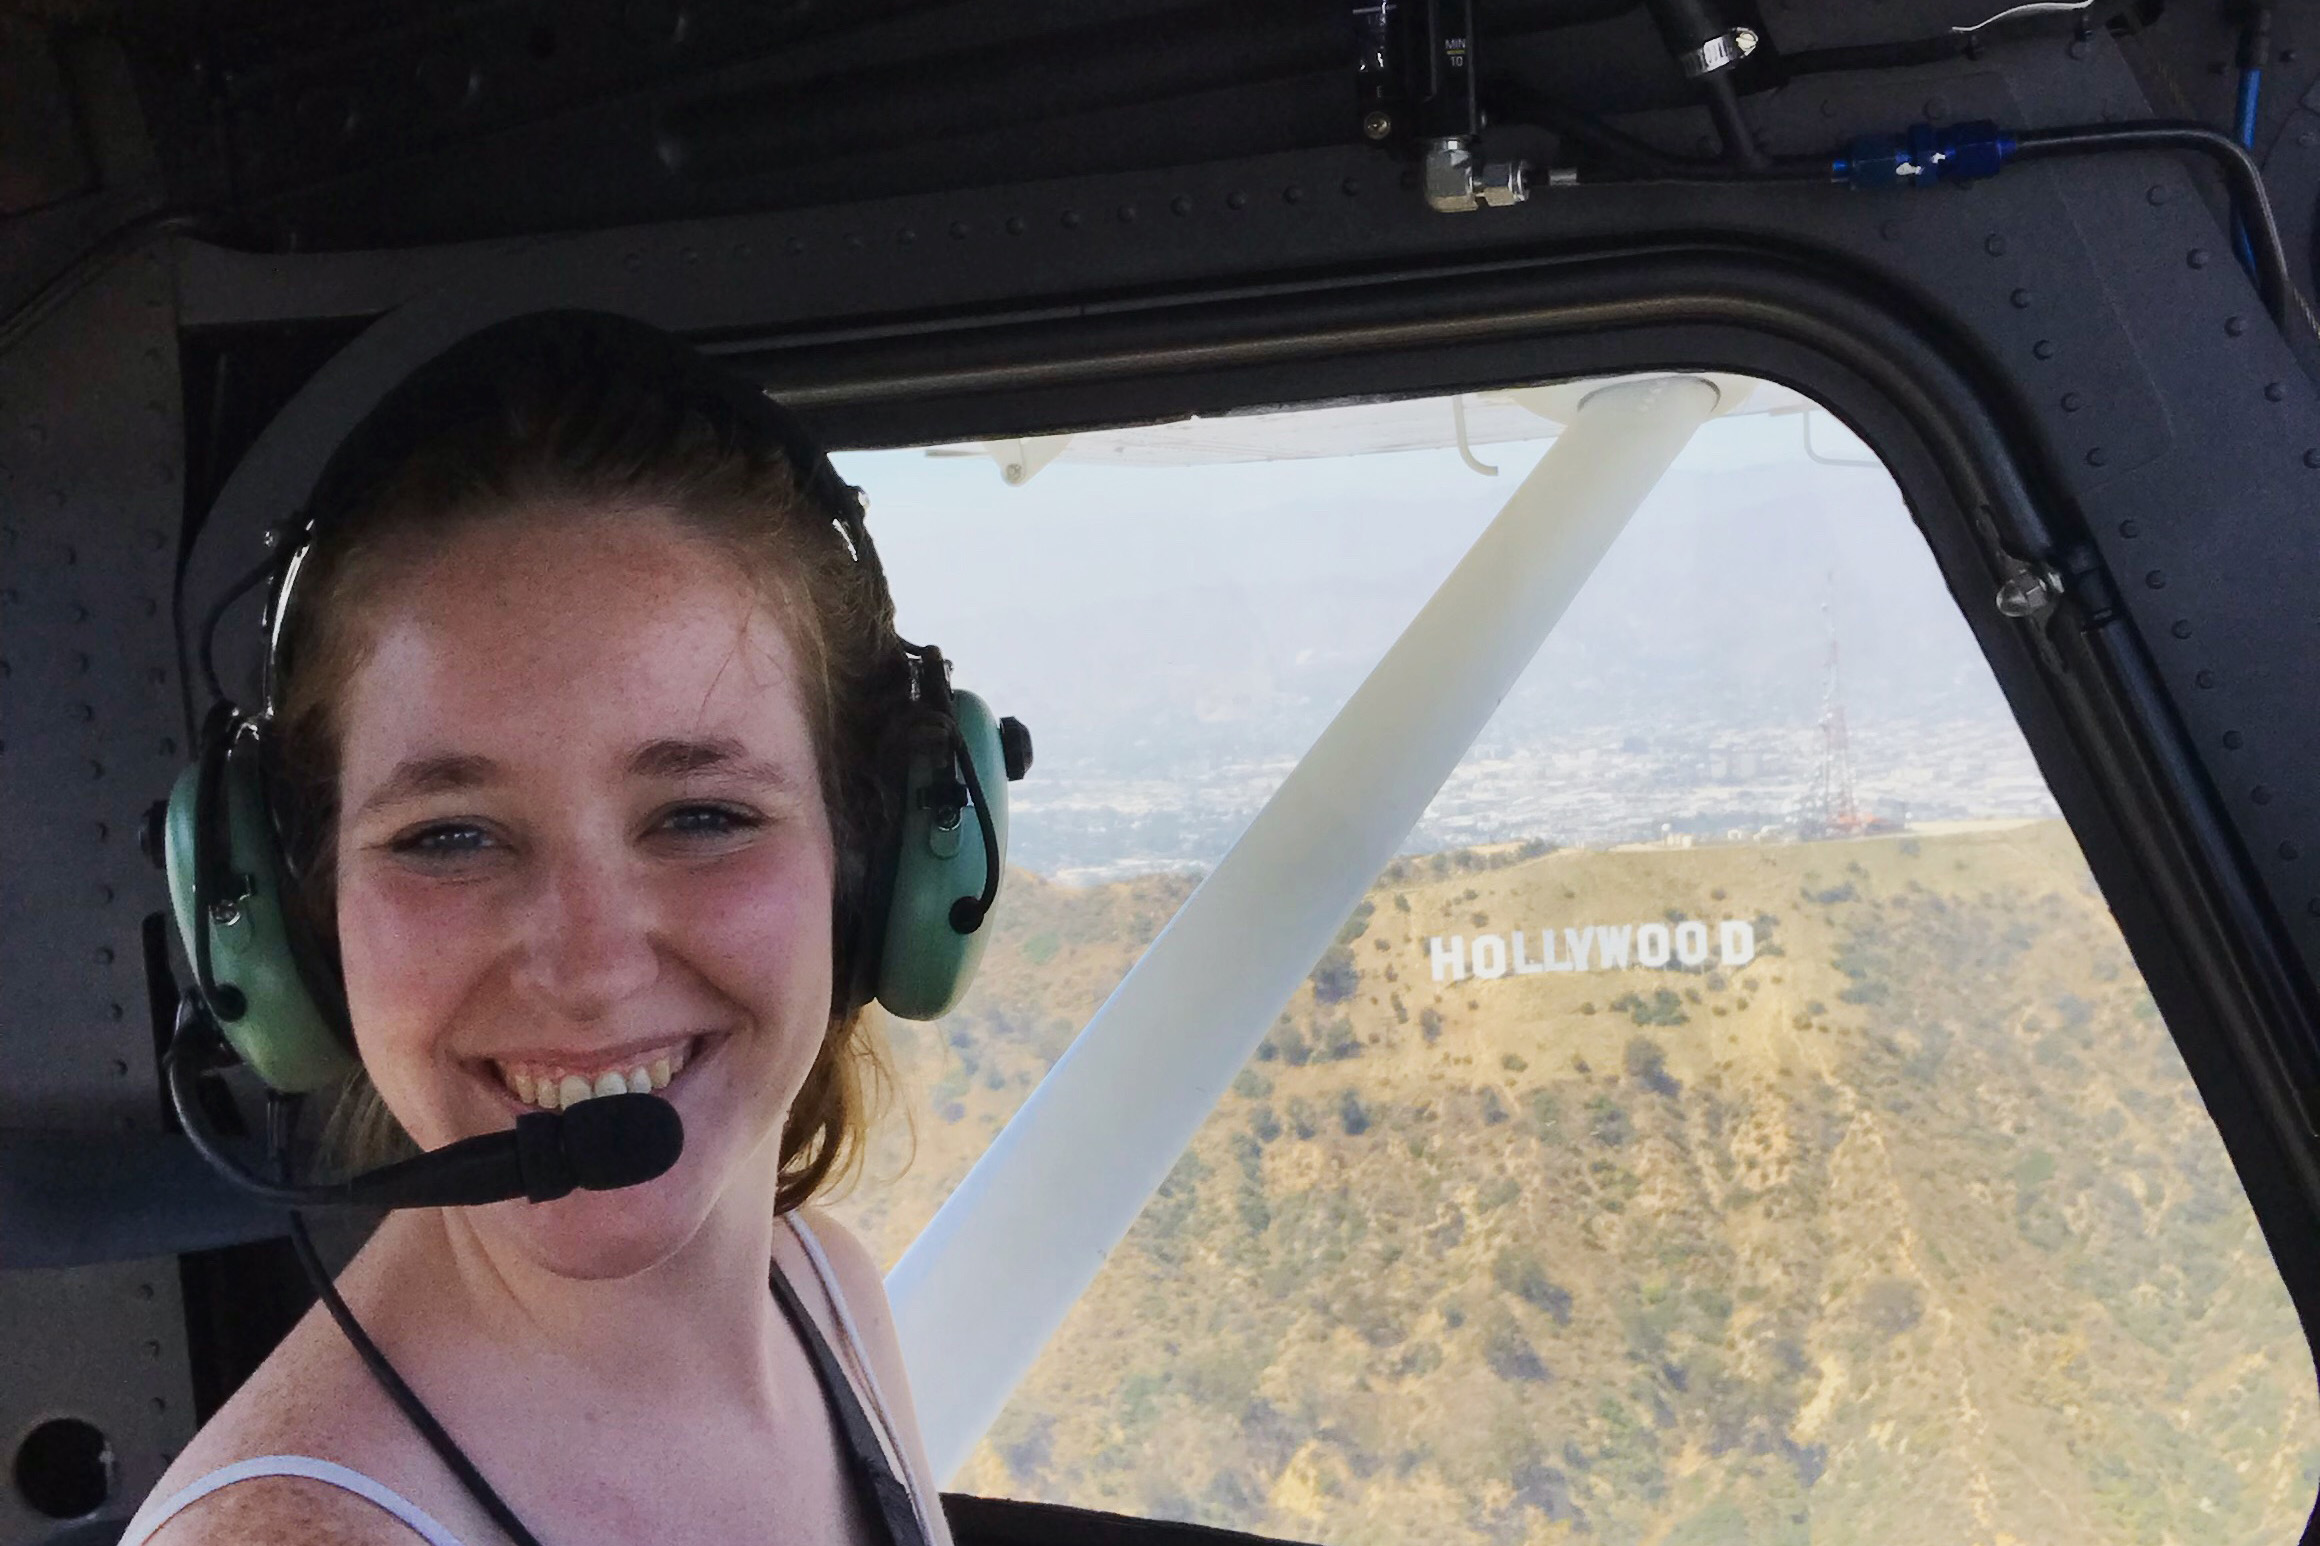 Rehm piloting a helicopter near the Hollywood sign